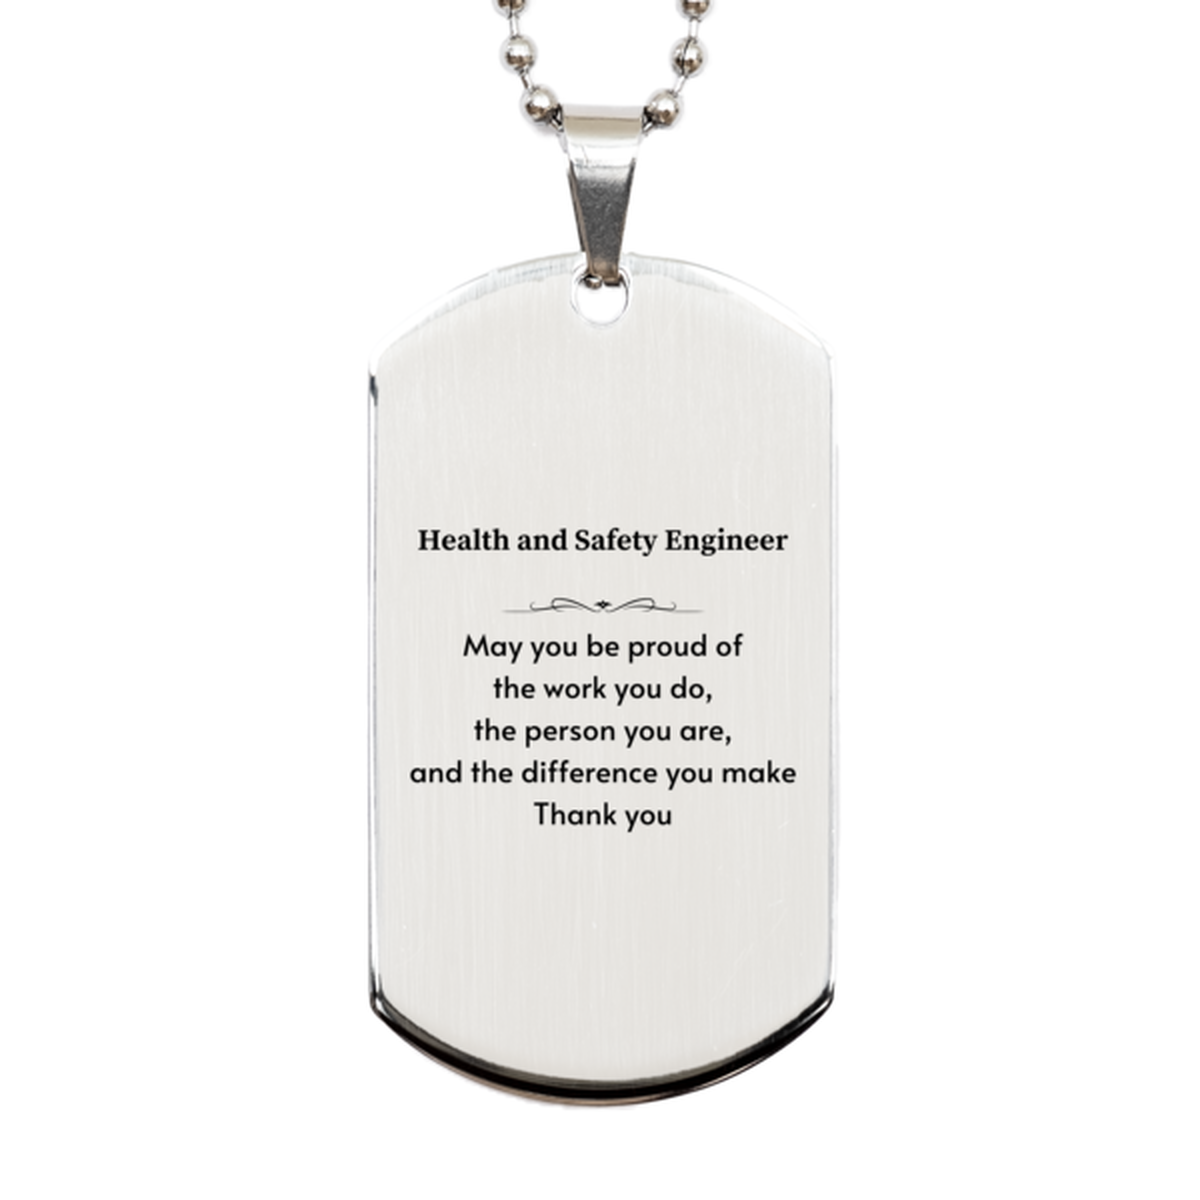 Heartwarming Silver Dog Tag Retirement Coworkers Gifts for Health and Safety Engineer, Health and Safety Engineer May You be proud of the work you do, the person you are Gifts for Boss Men Women Friends